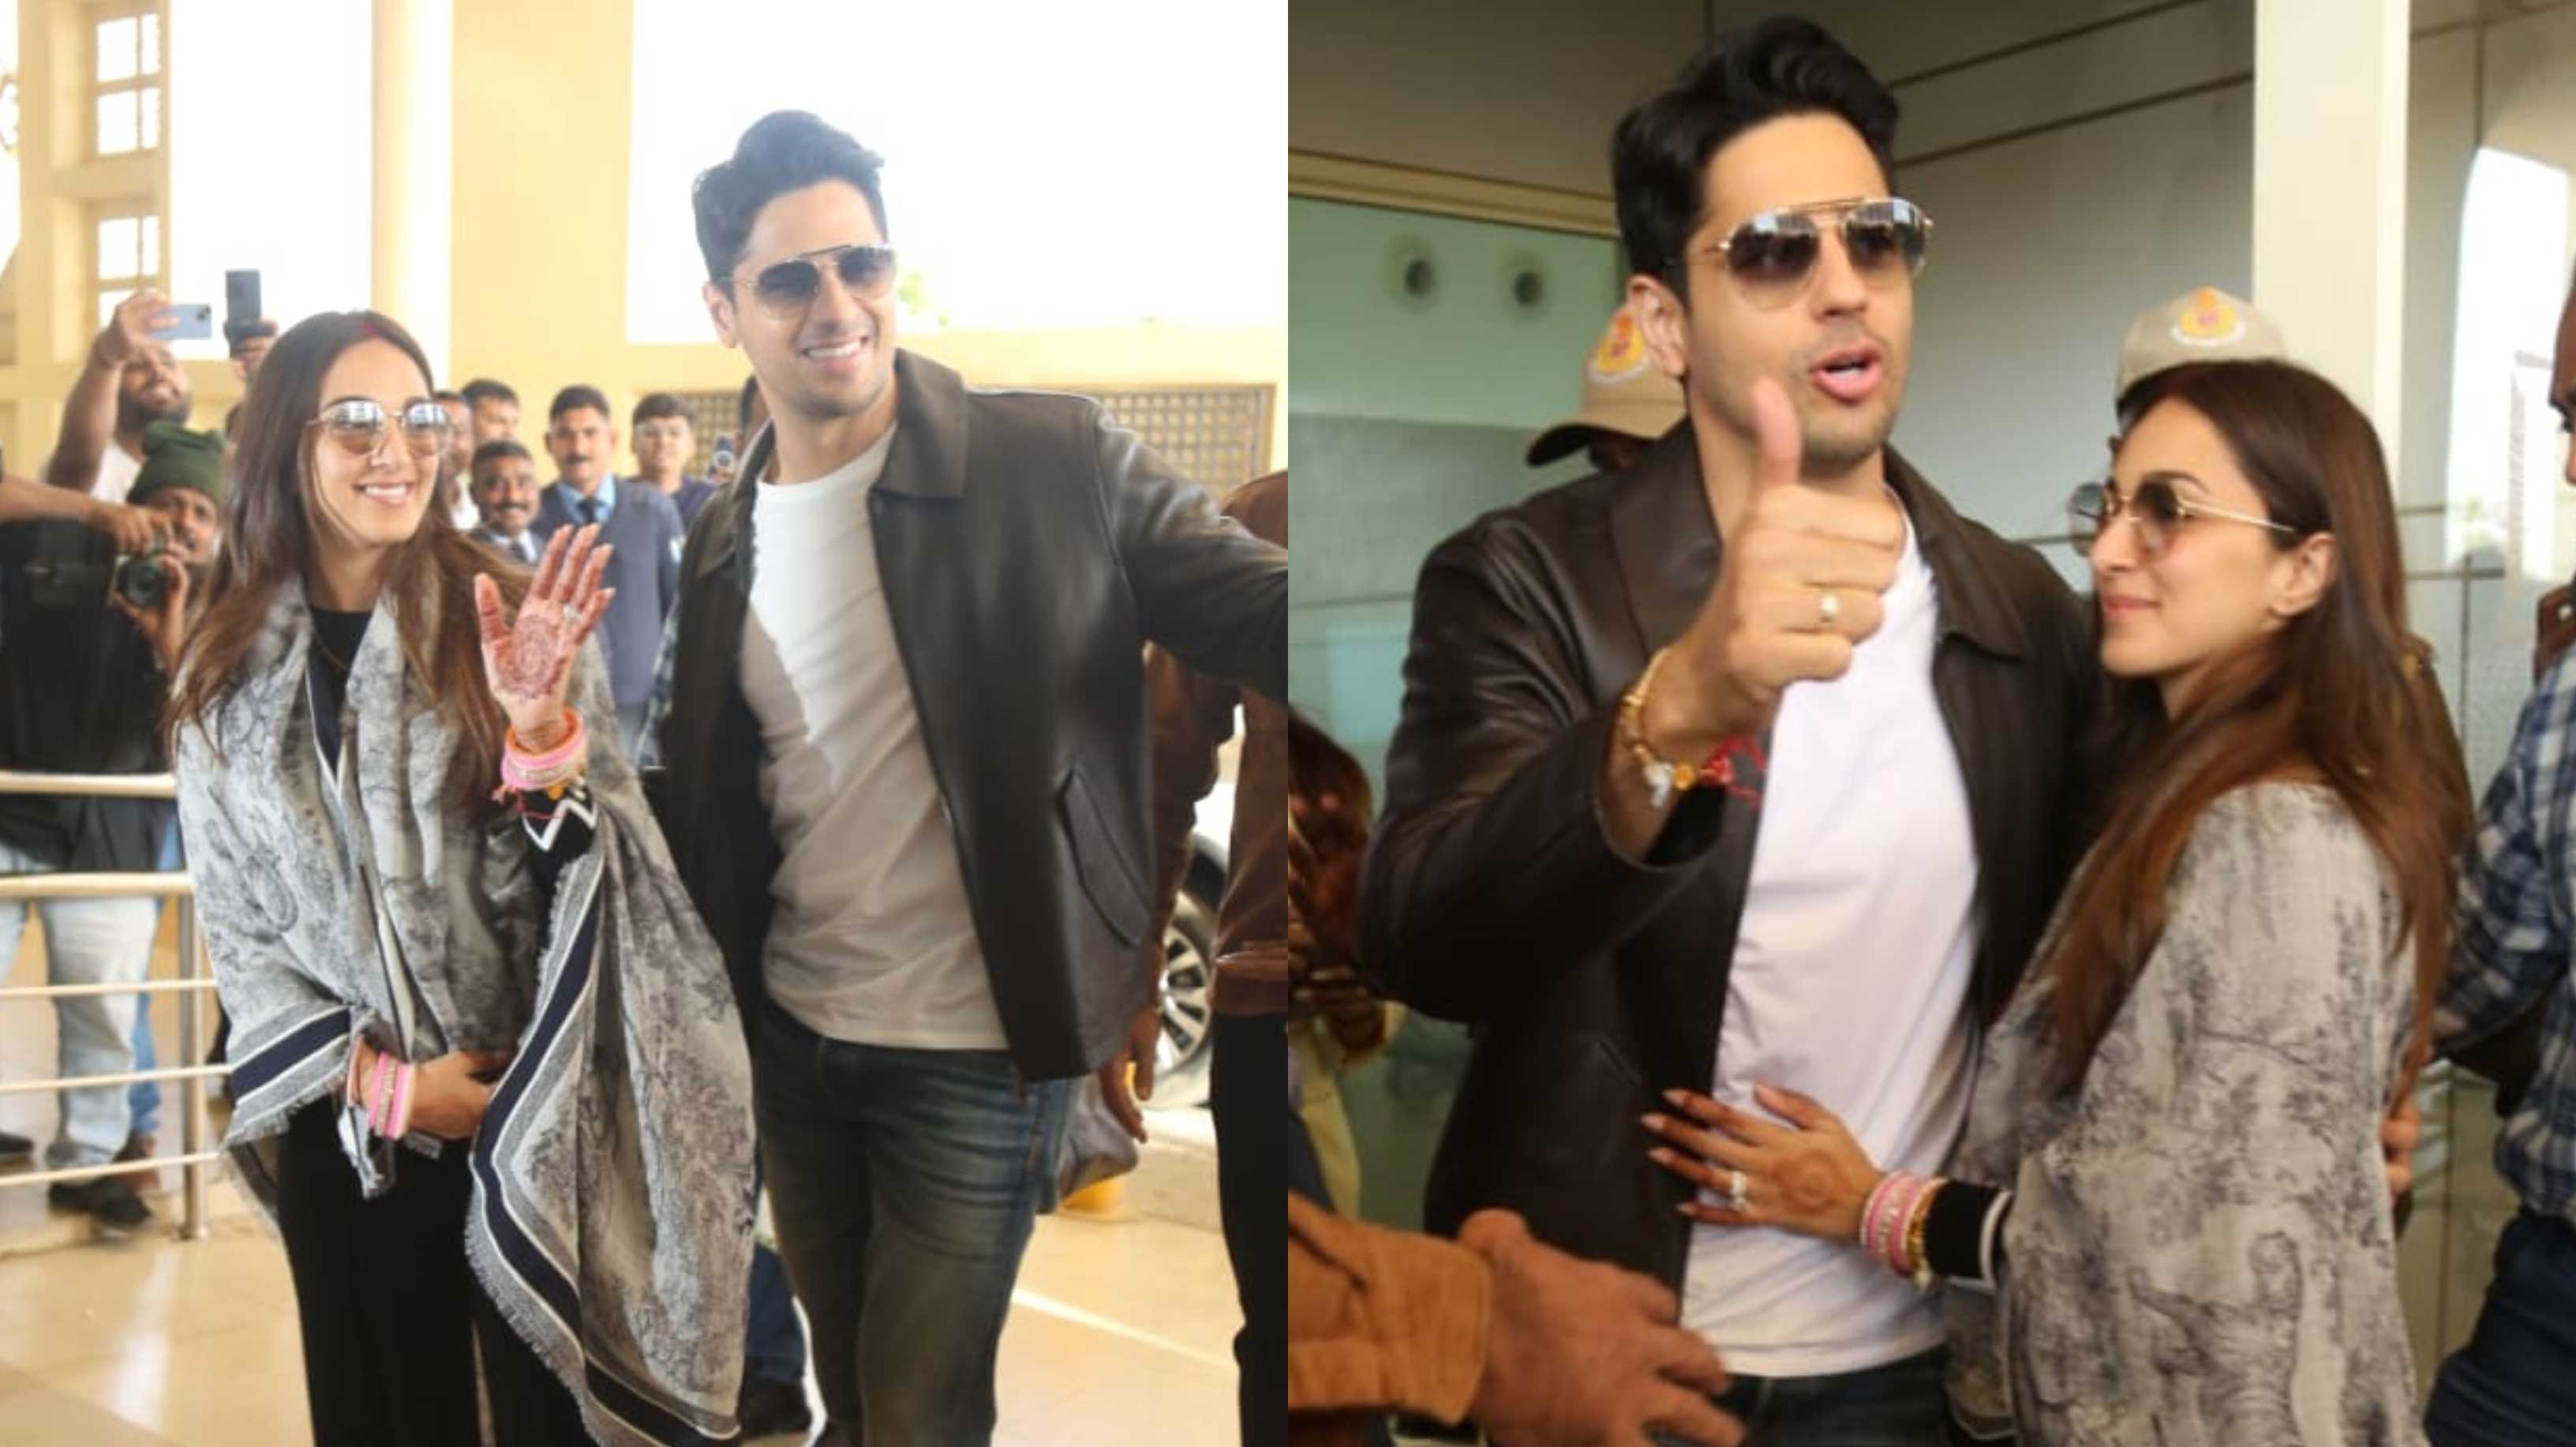 Newlyweds Sidharth Malhotra and Kiara Advani greet paps at airport; fans gush over bride’s sindoor with casual attire